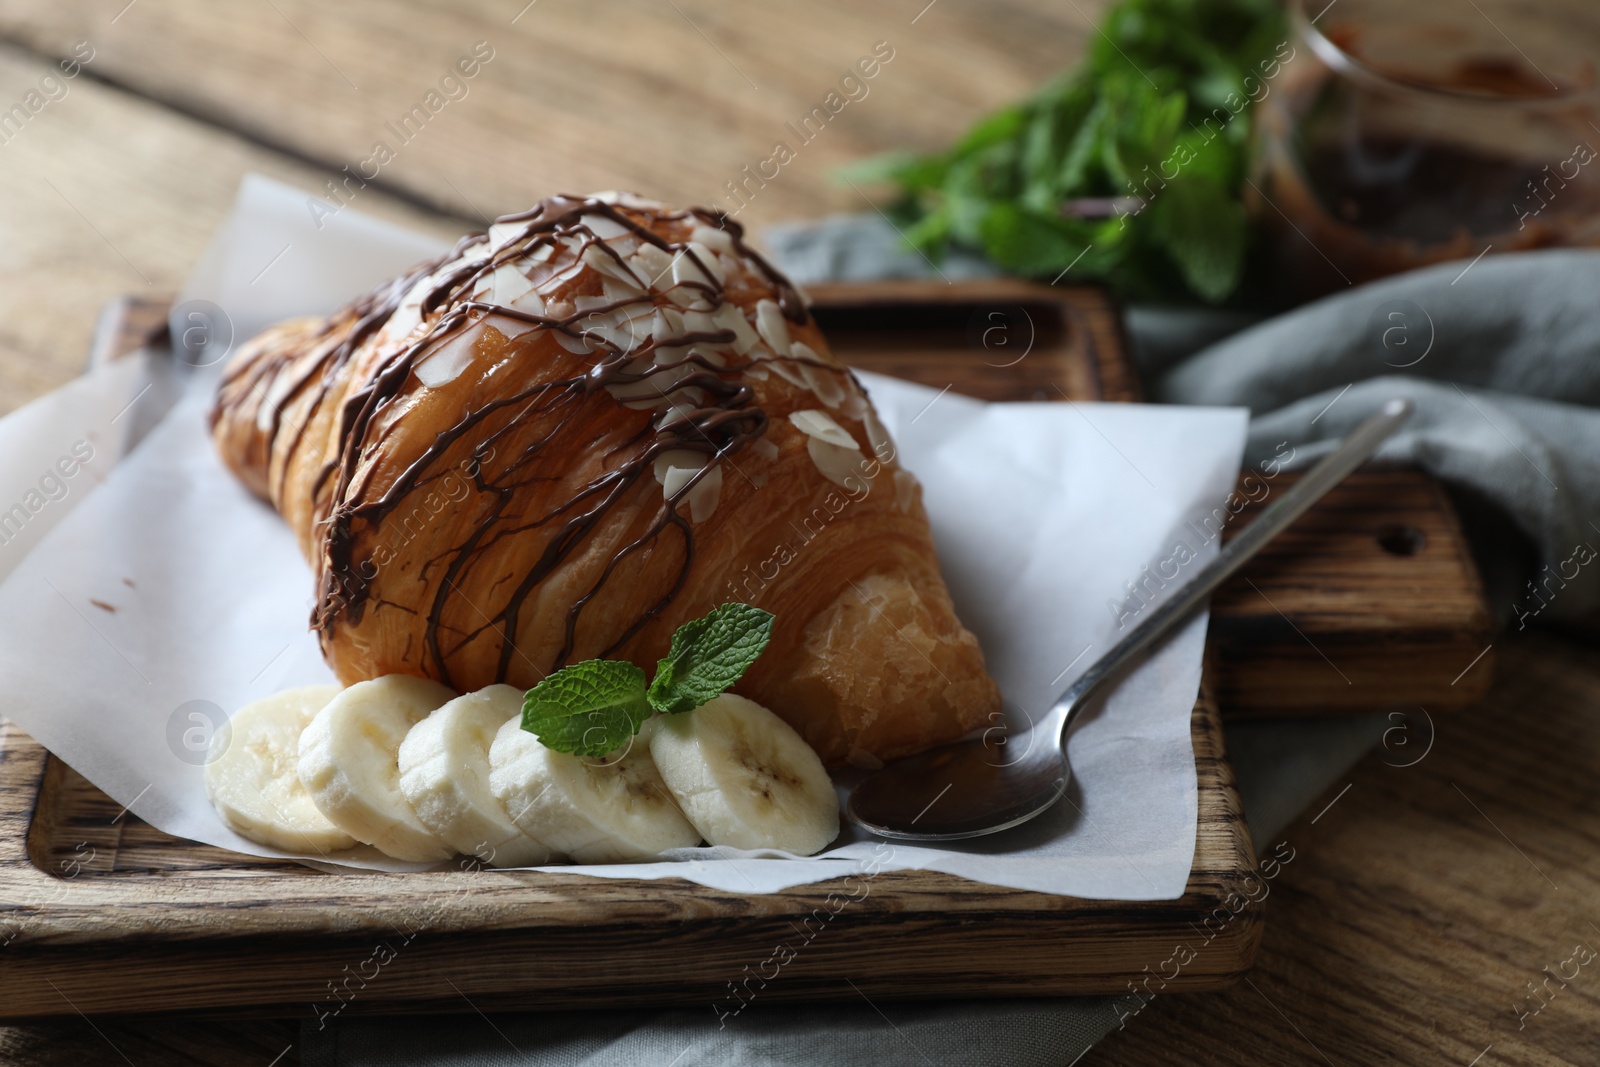 Photo of Delicious croissant with chocolate, banana and spoon on wooden table, closeup